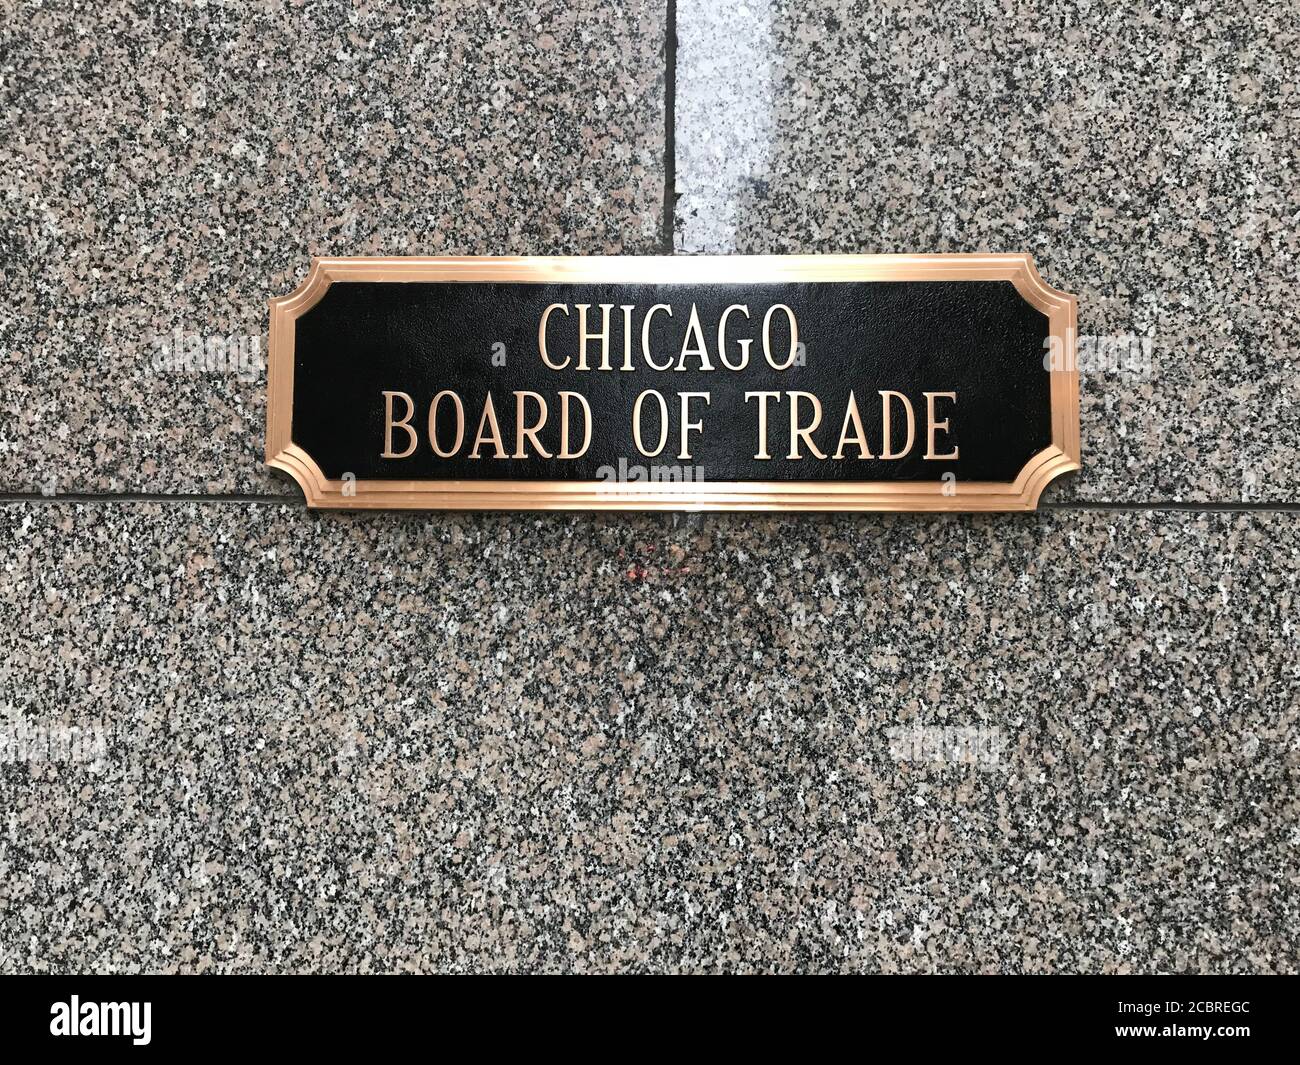 Chicago Board of Trade sign on building. Chicago, Illinois / United States. Stock Photo